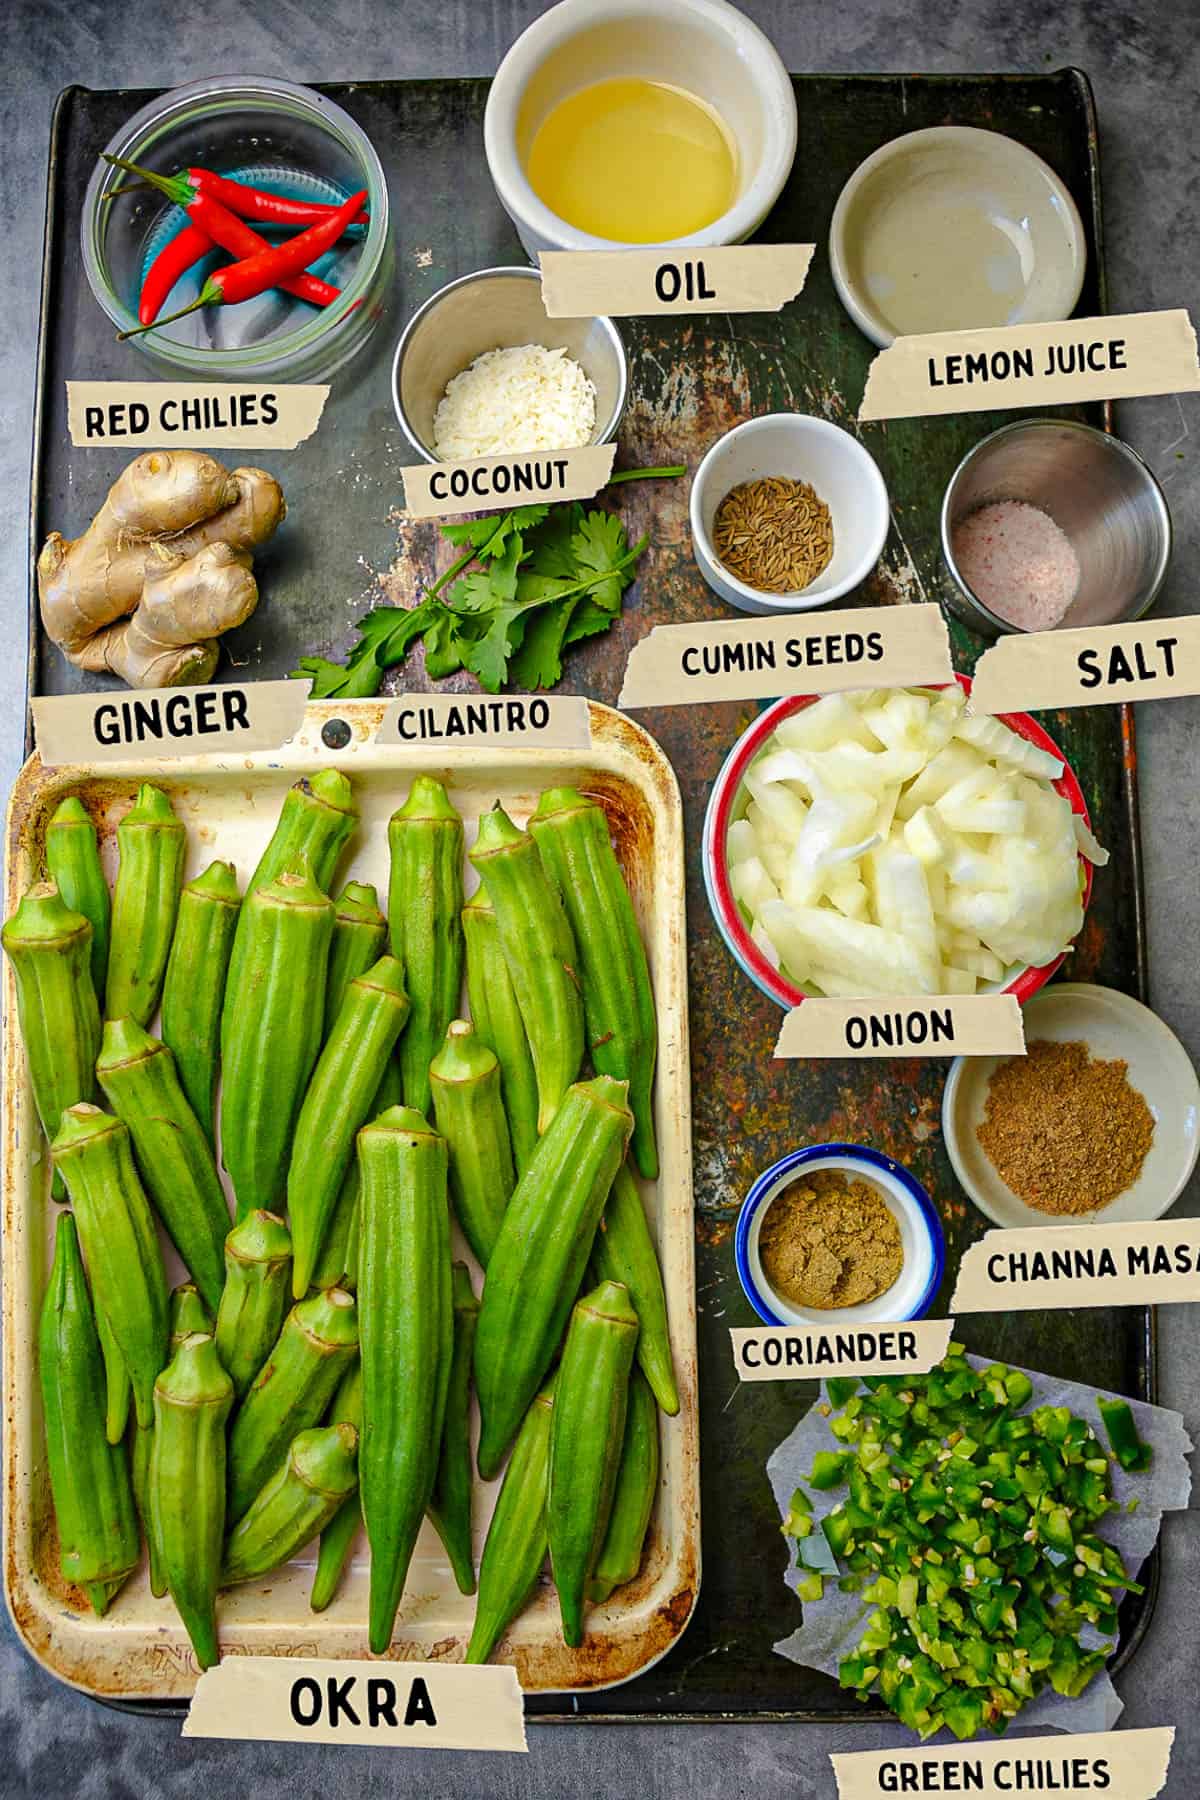 Ingredients for bhindi are measured out and labeled on top of a scratched black metal tray.